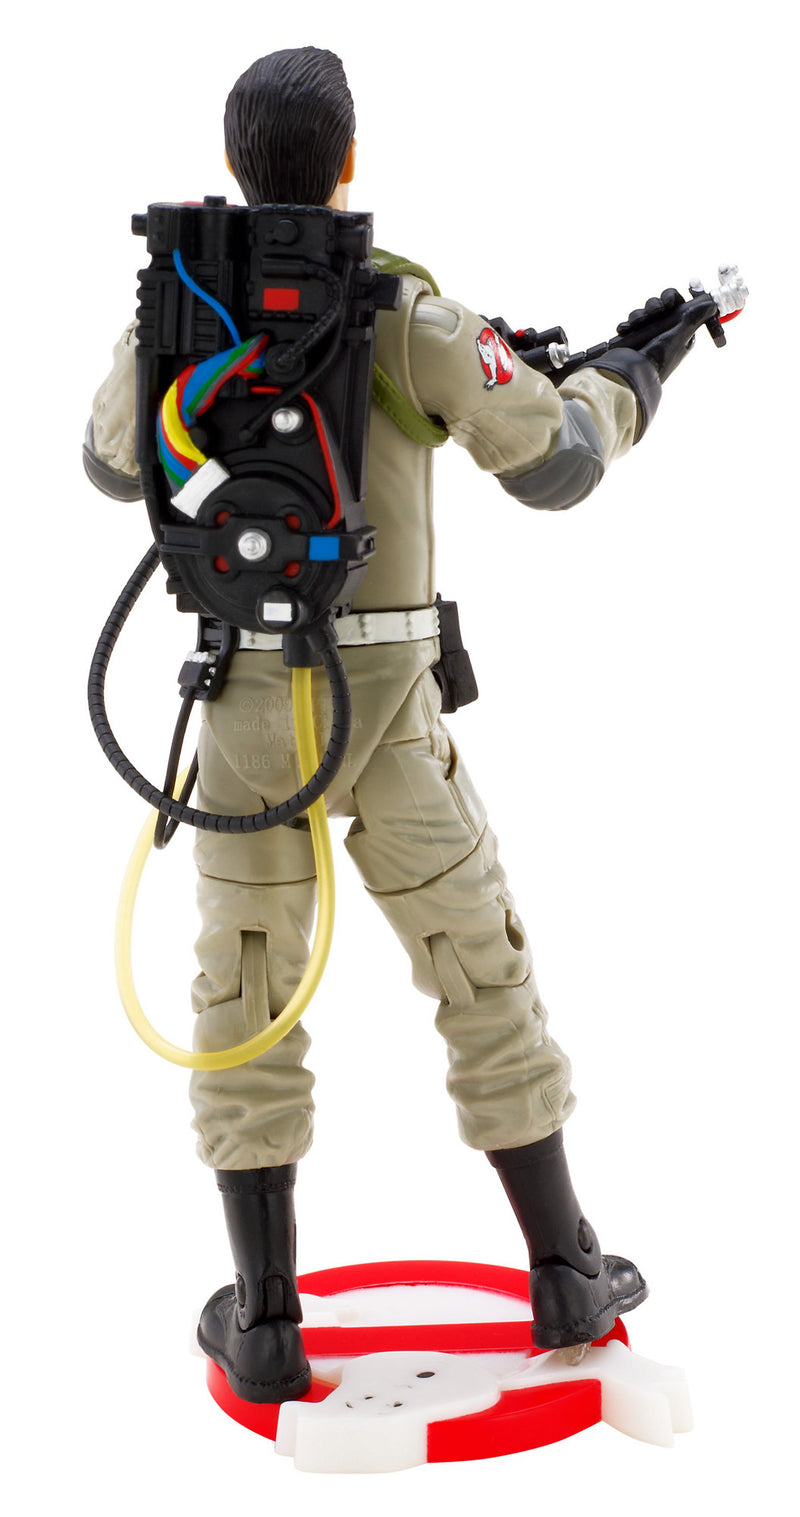 Ghostbusters Ray Stantz and Winston Zeddemore Figure